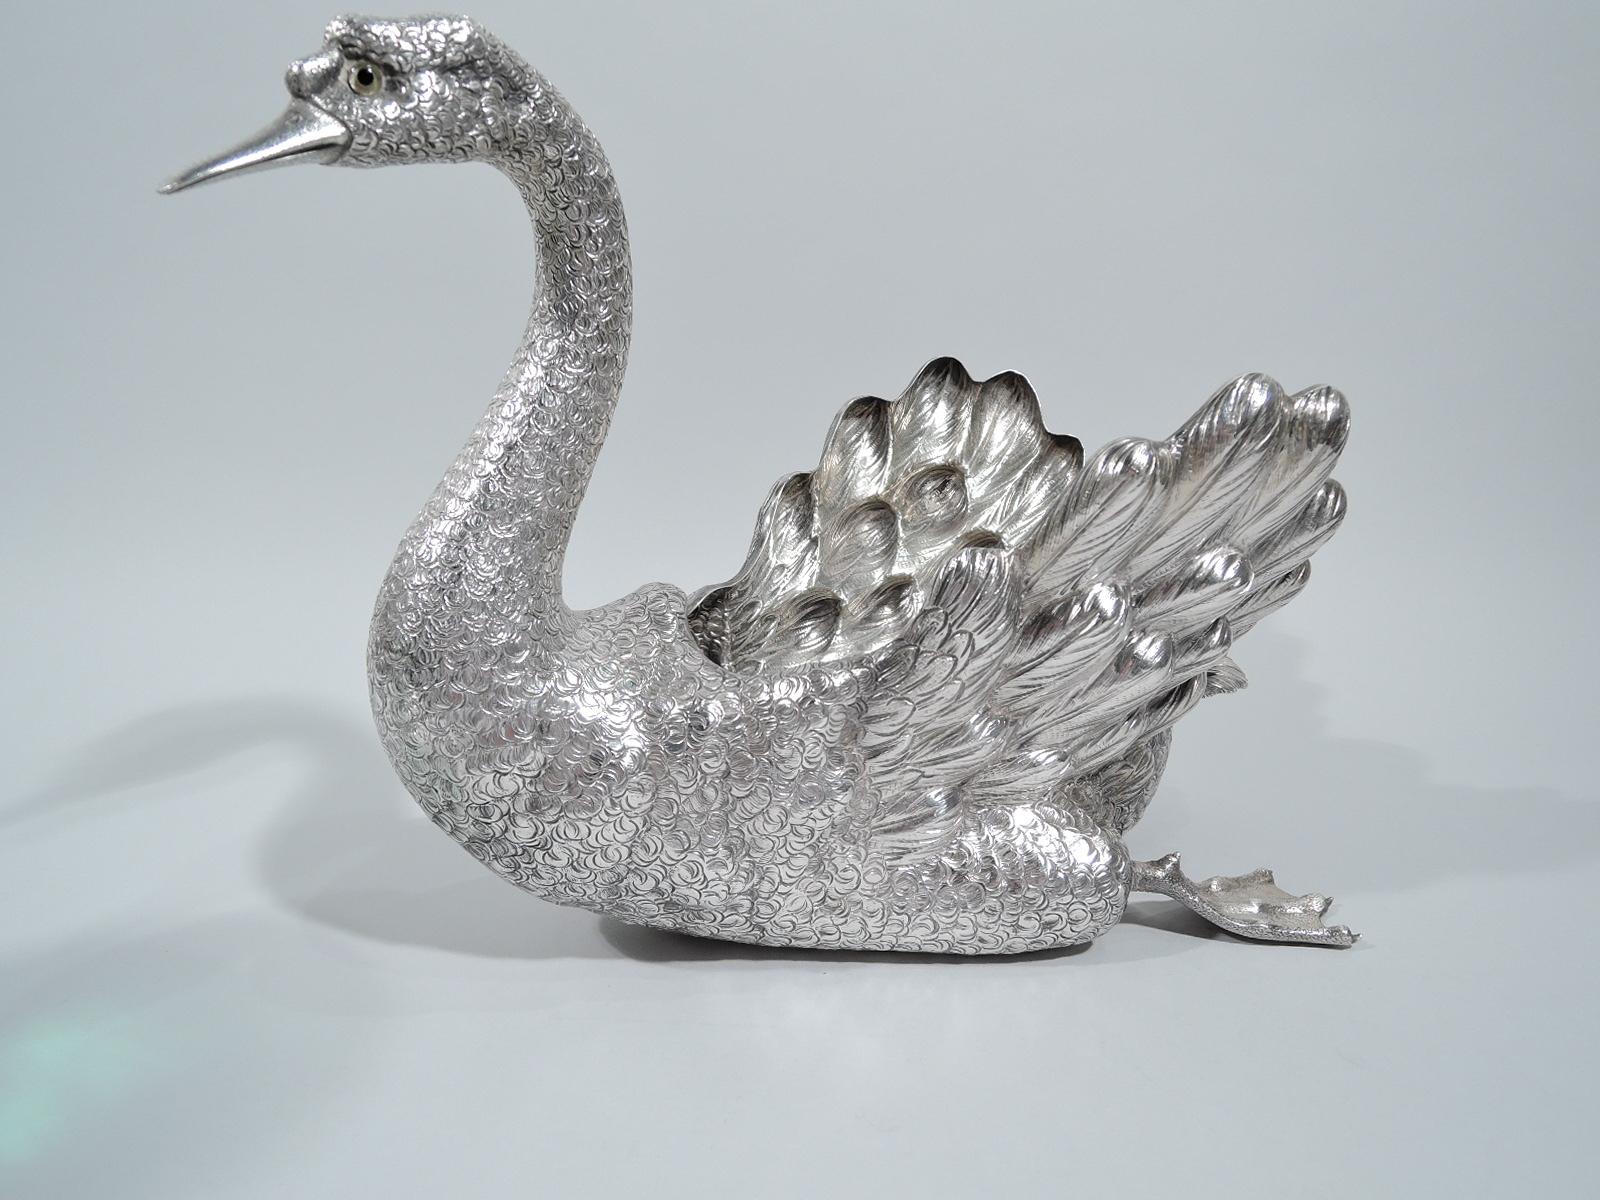 Majestic sterling silver swan bowl. Hollow body, scrolled neck, pointed bill, intent glass eyes, and paddling webbed feet. Realistic plumage from scaly to fluffy. A big bird centerpiece to grace your next dinner party. Marked “Buccellati / Italy /